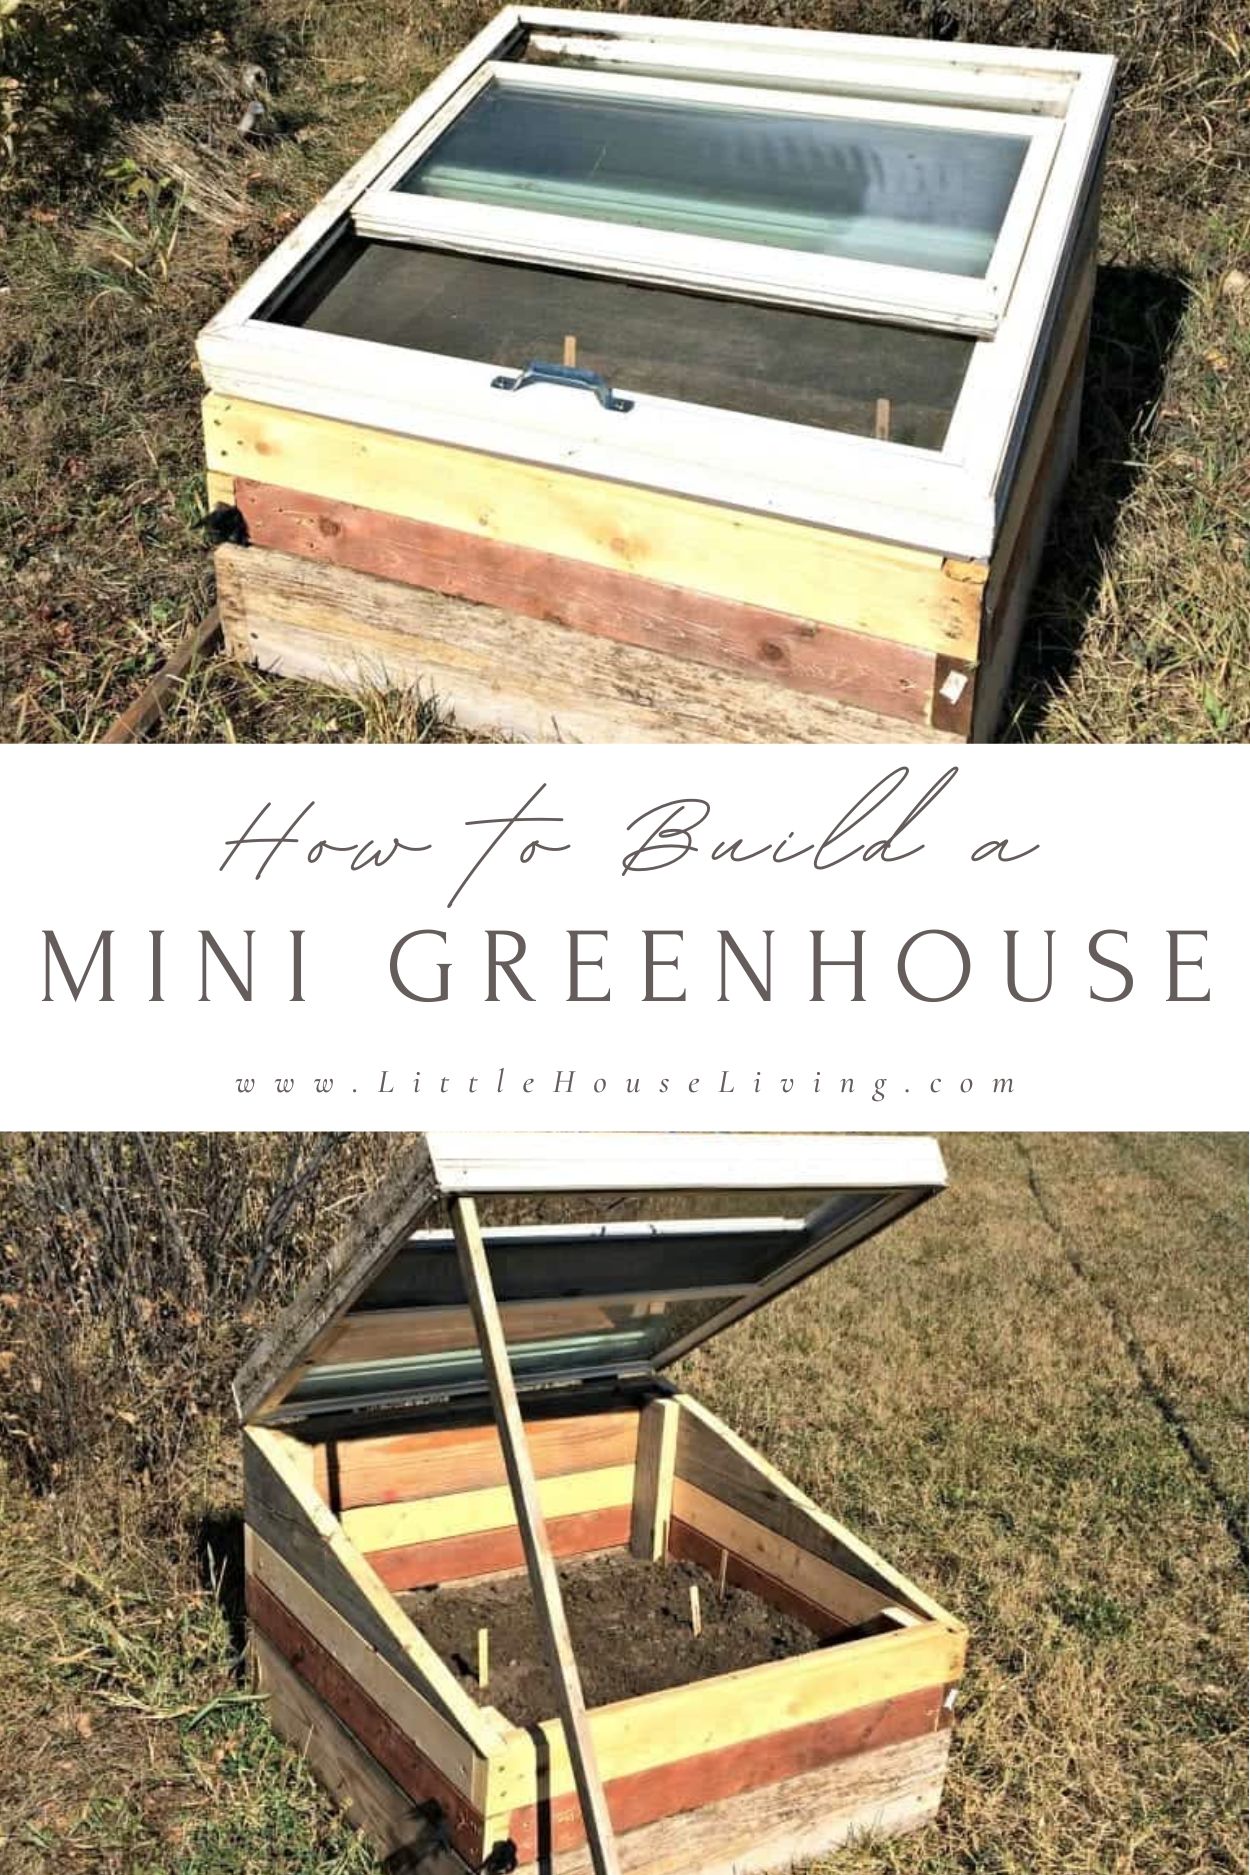 Are you looking to create a mini greenhouse so that you can enjoy an extended growing season? Here's how we built ours for free and how you can too!